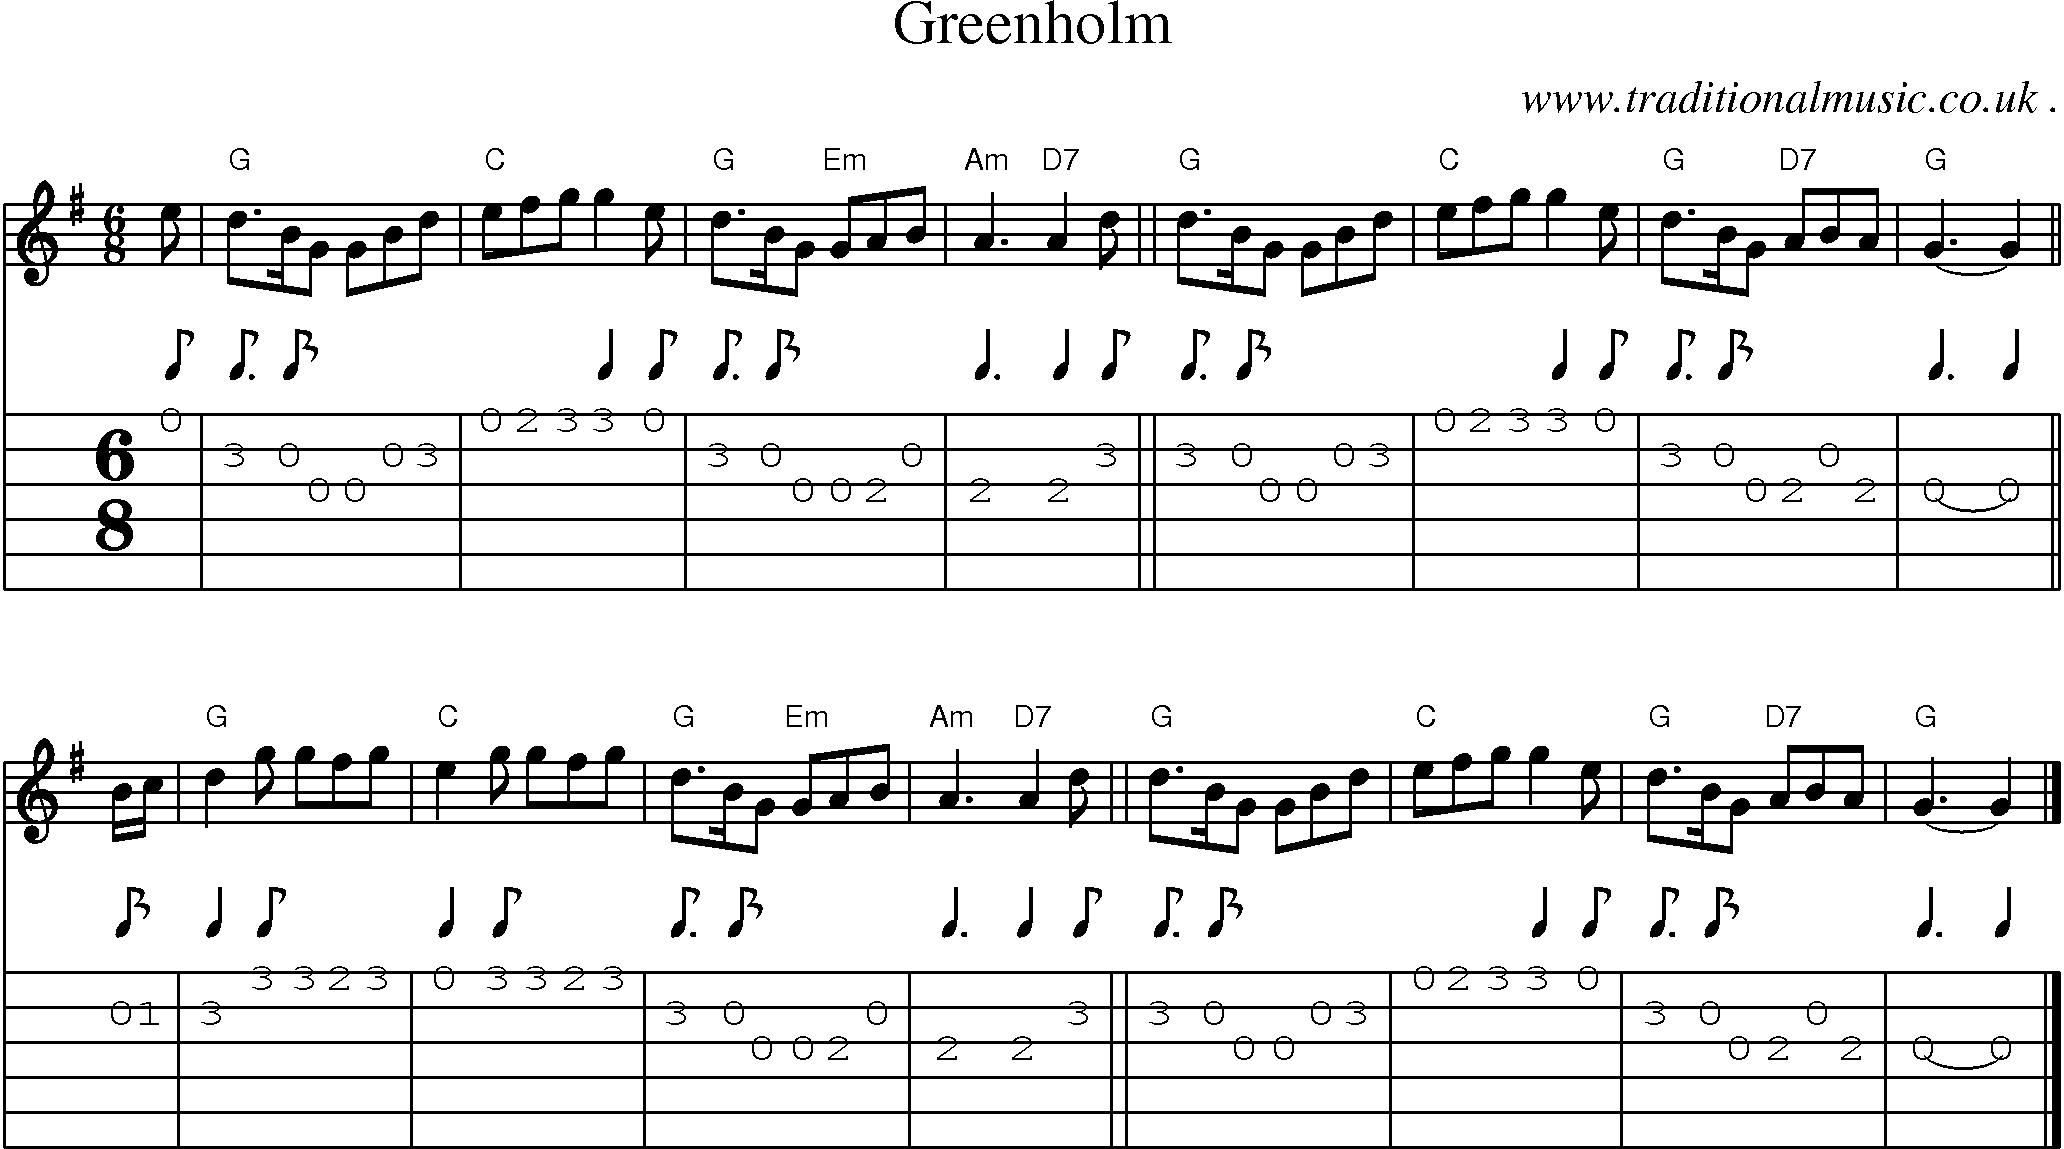 Sheet-music  score, Chords and Guitar Tabs for Greenholm